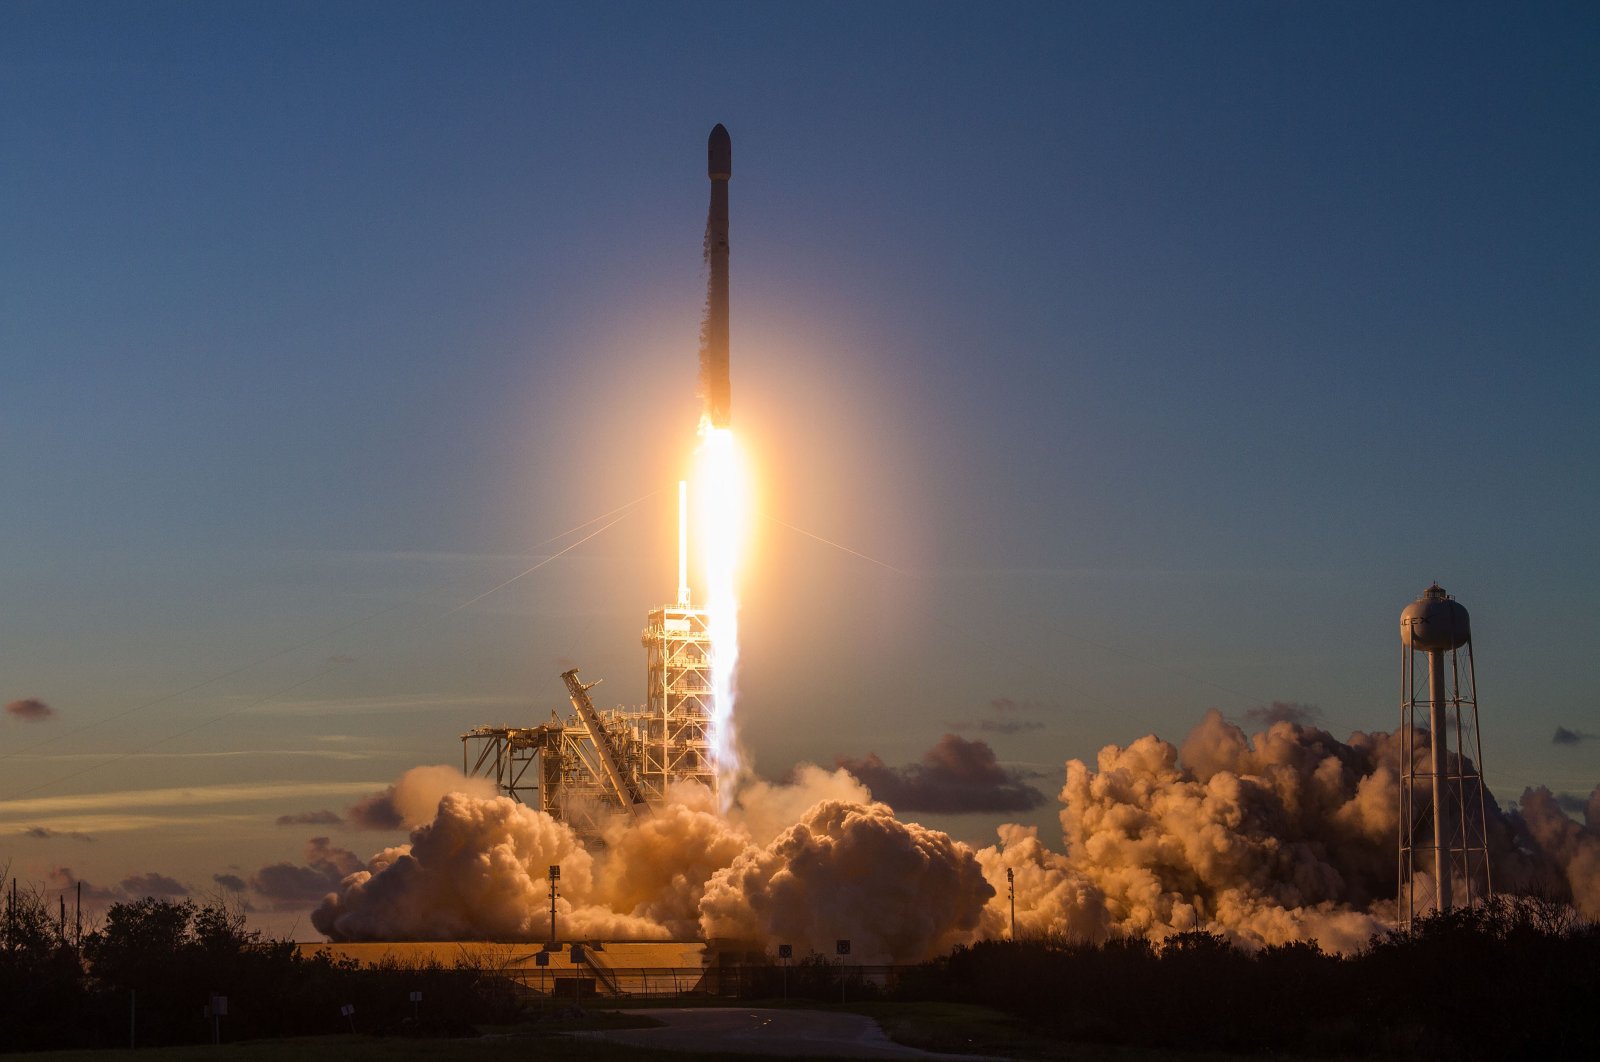 The SpaceX Falcon 9 rocket lifts off carrying the Echostar 105/SES-11 communications satellite from Space Launch Complex 39A at the Kennedy Space Center, Oct. 11, 2017 in Cape Canaveral, Florida, U.S., Oct. 11, 2017. (SpaceX/Planet Pix via ZUMA Wire)